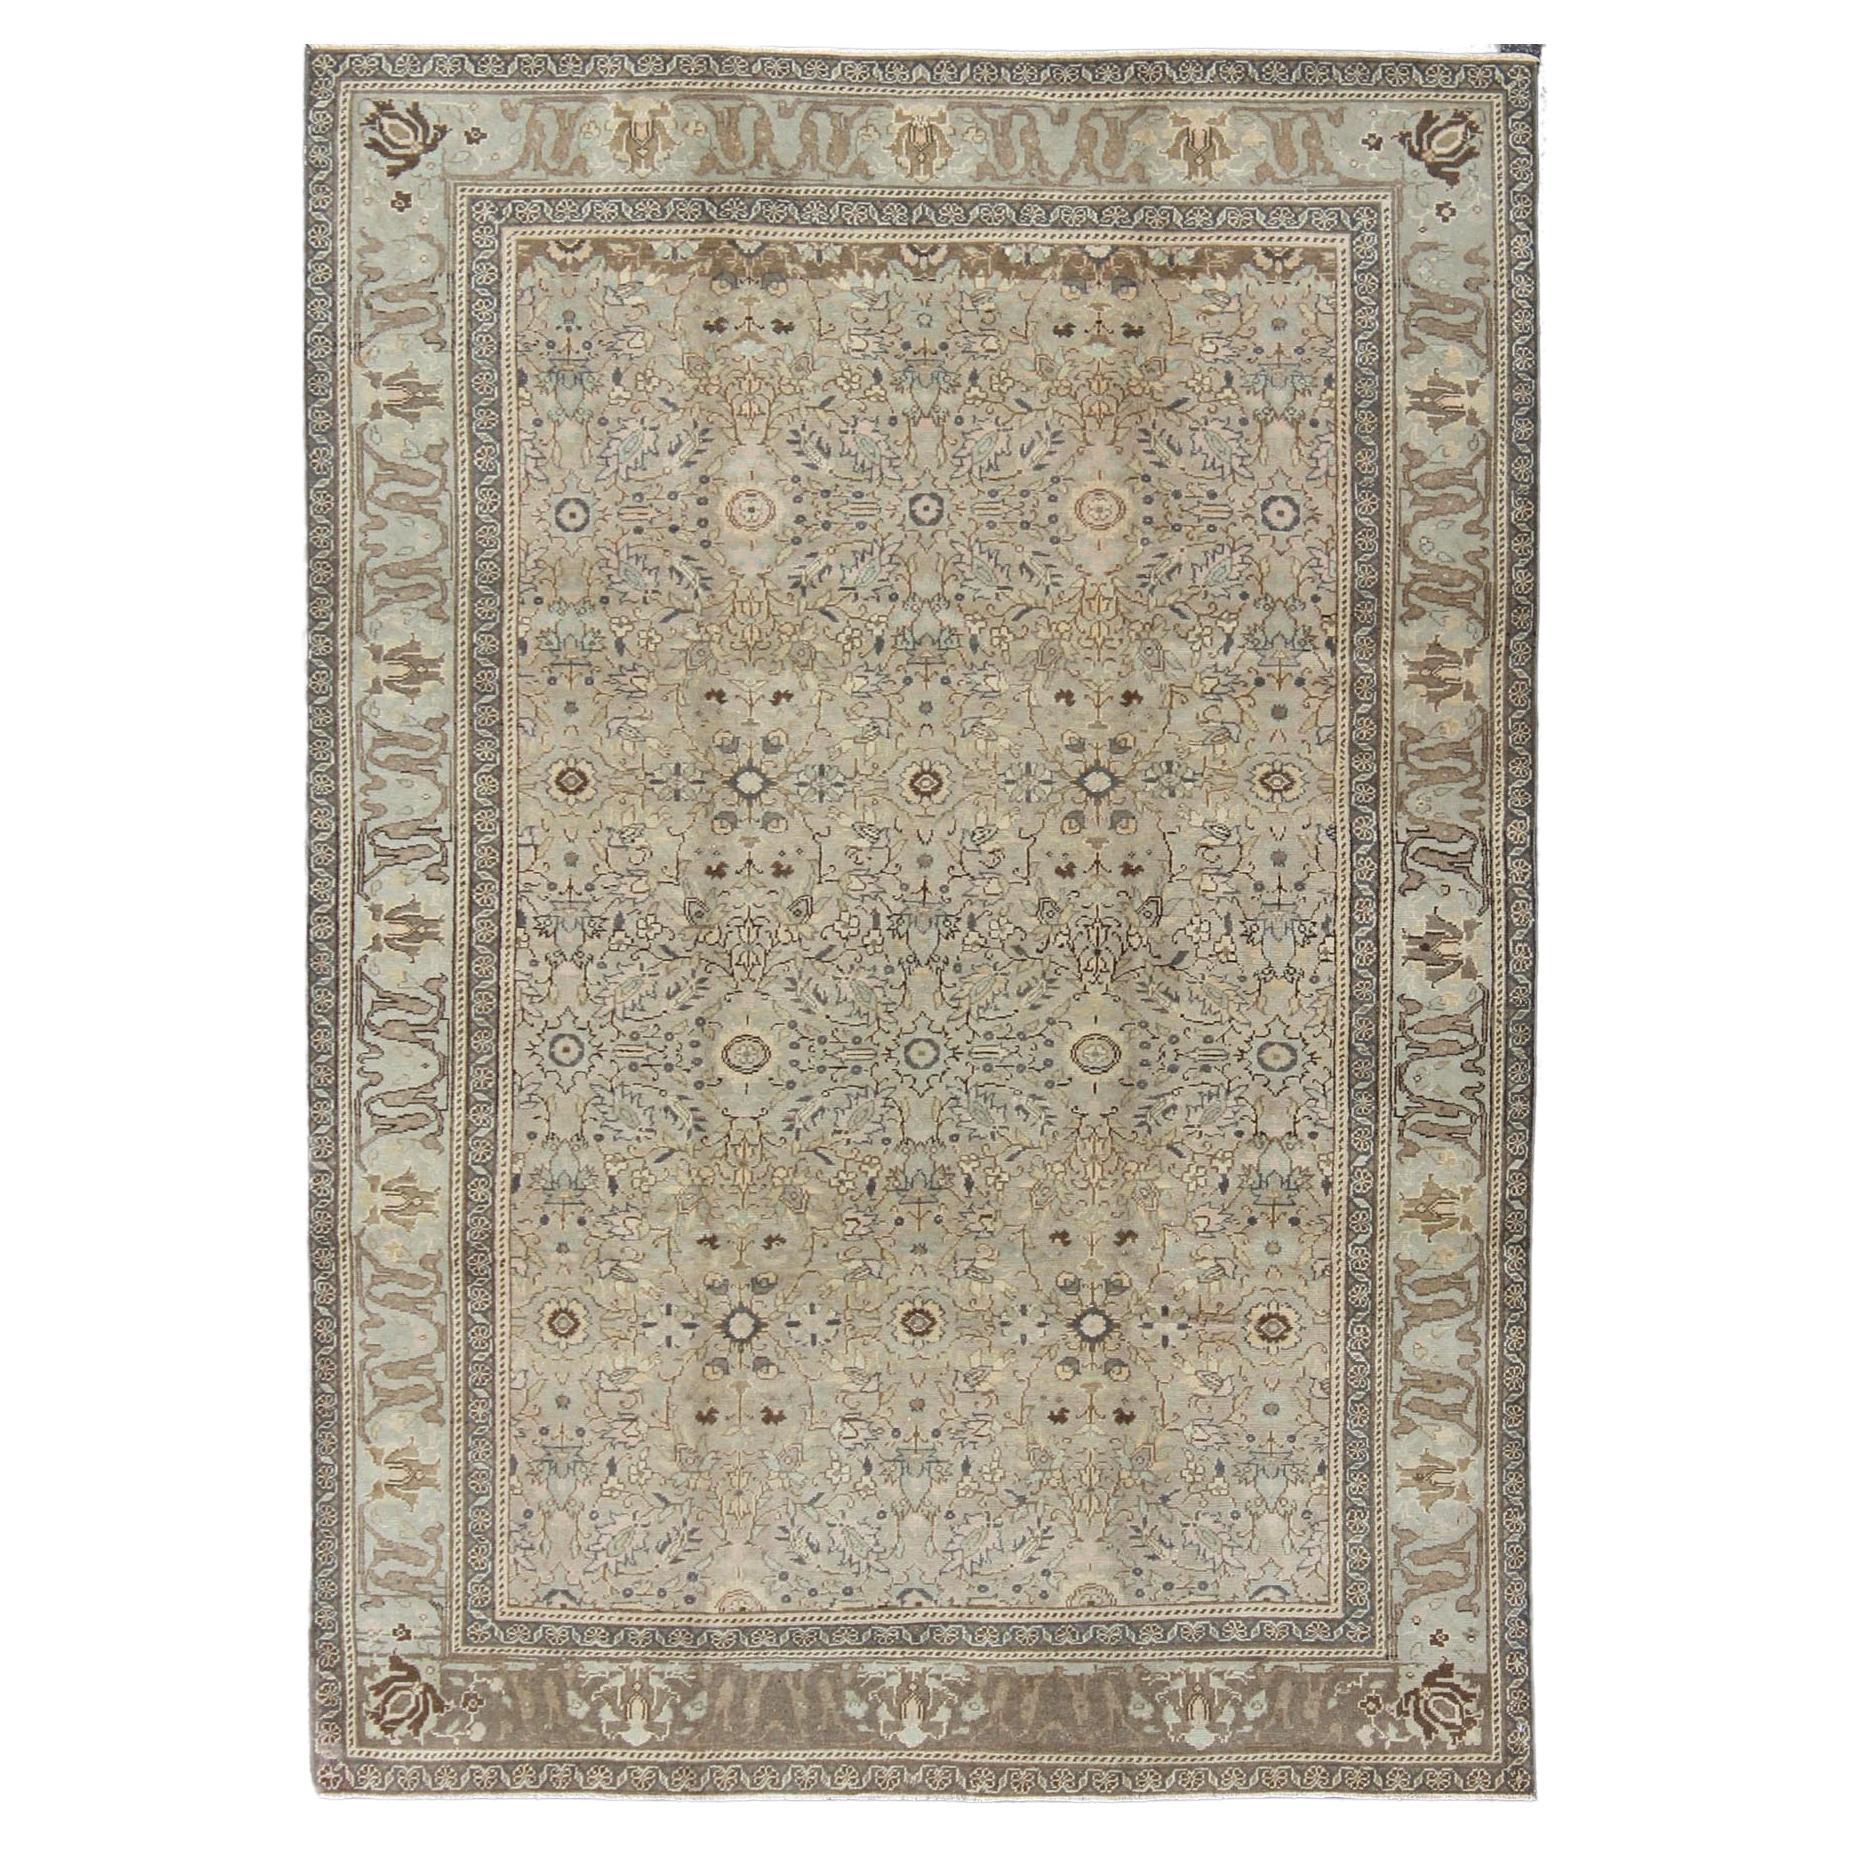 Vintage Turkish Sivas Rug with Floral Design in Earthy Neutrals  For Sale